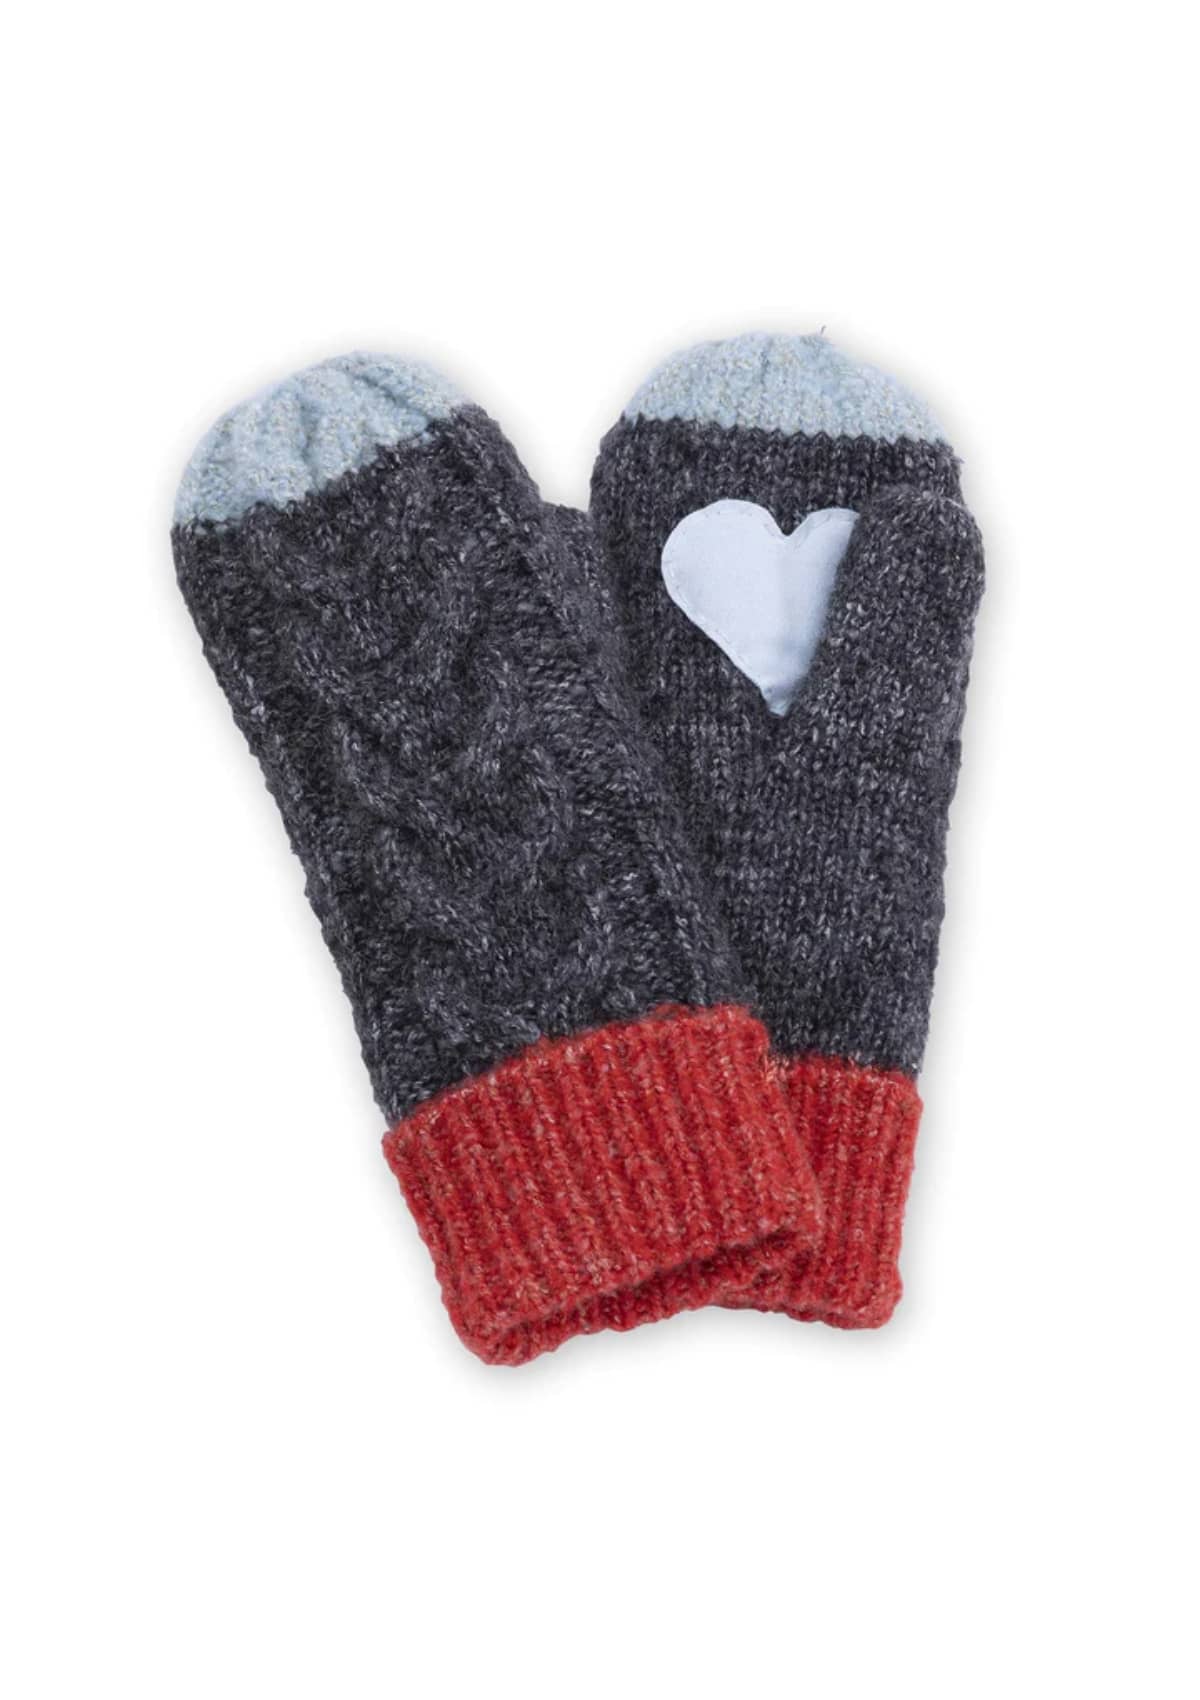 Black women's mittens with heart on palm.